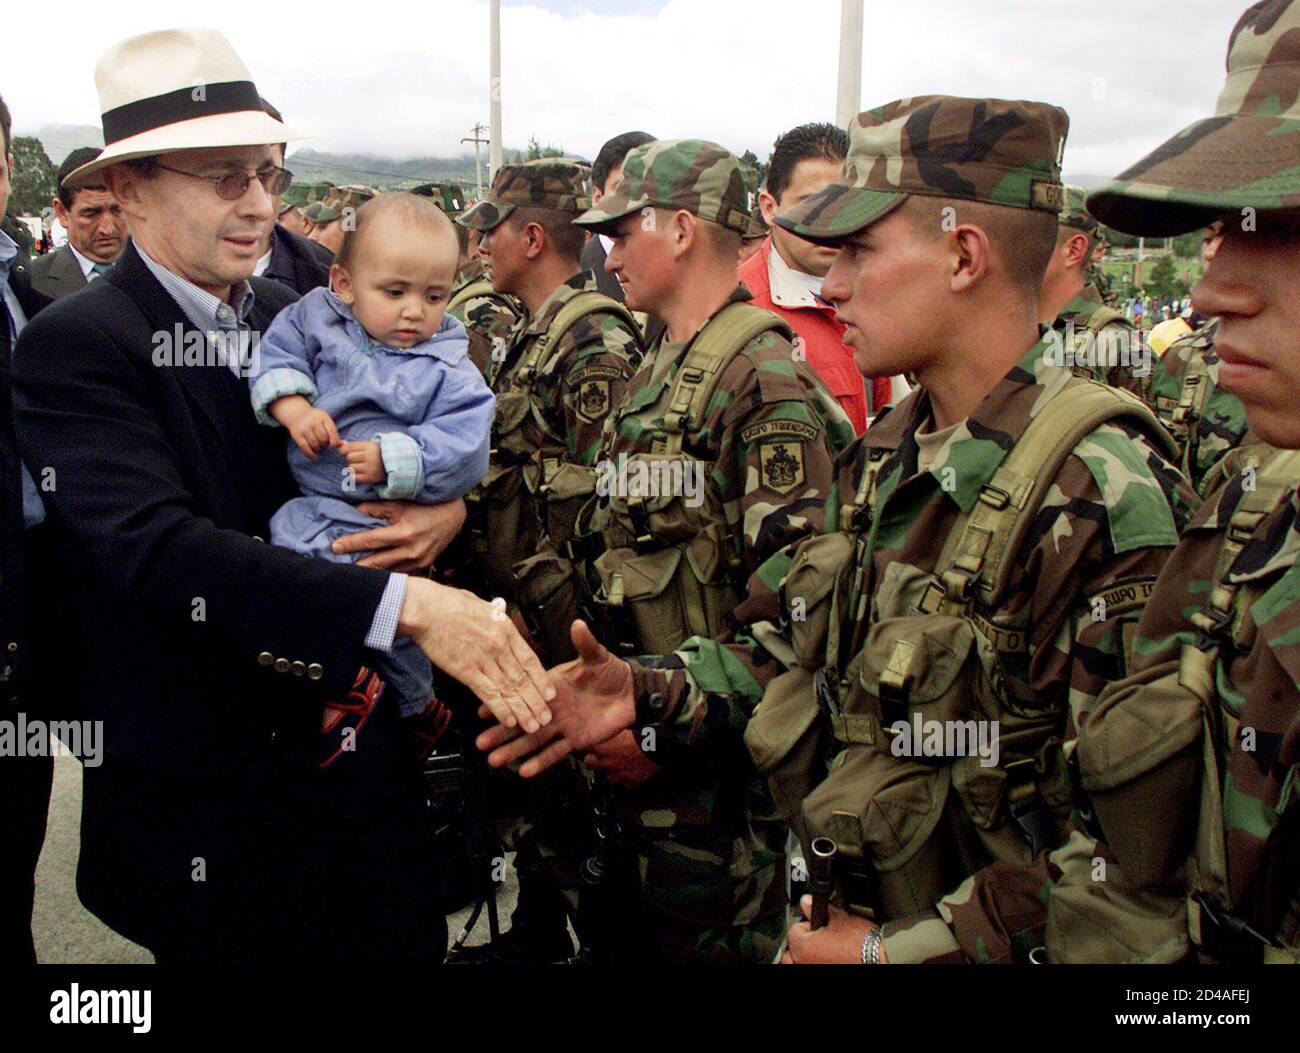 Colombian President Alvaro Uribe greets a new soldiers in Guasca, in the province of Cundinamarca, June 16, 2003. 10,000 new peasant soldiers are being sworn into service on Monday across the country. The Colombian army capturing 58 suspected Marxist guerrillas in weekend raids and said on Monday it believed the operation had dealt a blow against rebel plans to carry out attacks in the capital. Those held are alleged members of the Revolutionary Armed Forces of Colombia, a 17,000-strong force known by the Spanish initials FARC. REUTERS/Daniel Munoz  DM/GN Stock Photo